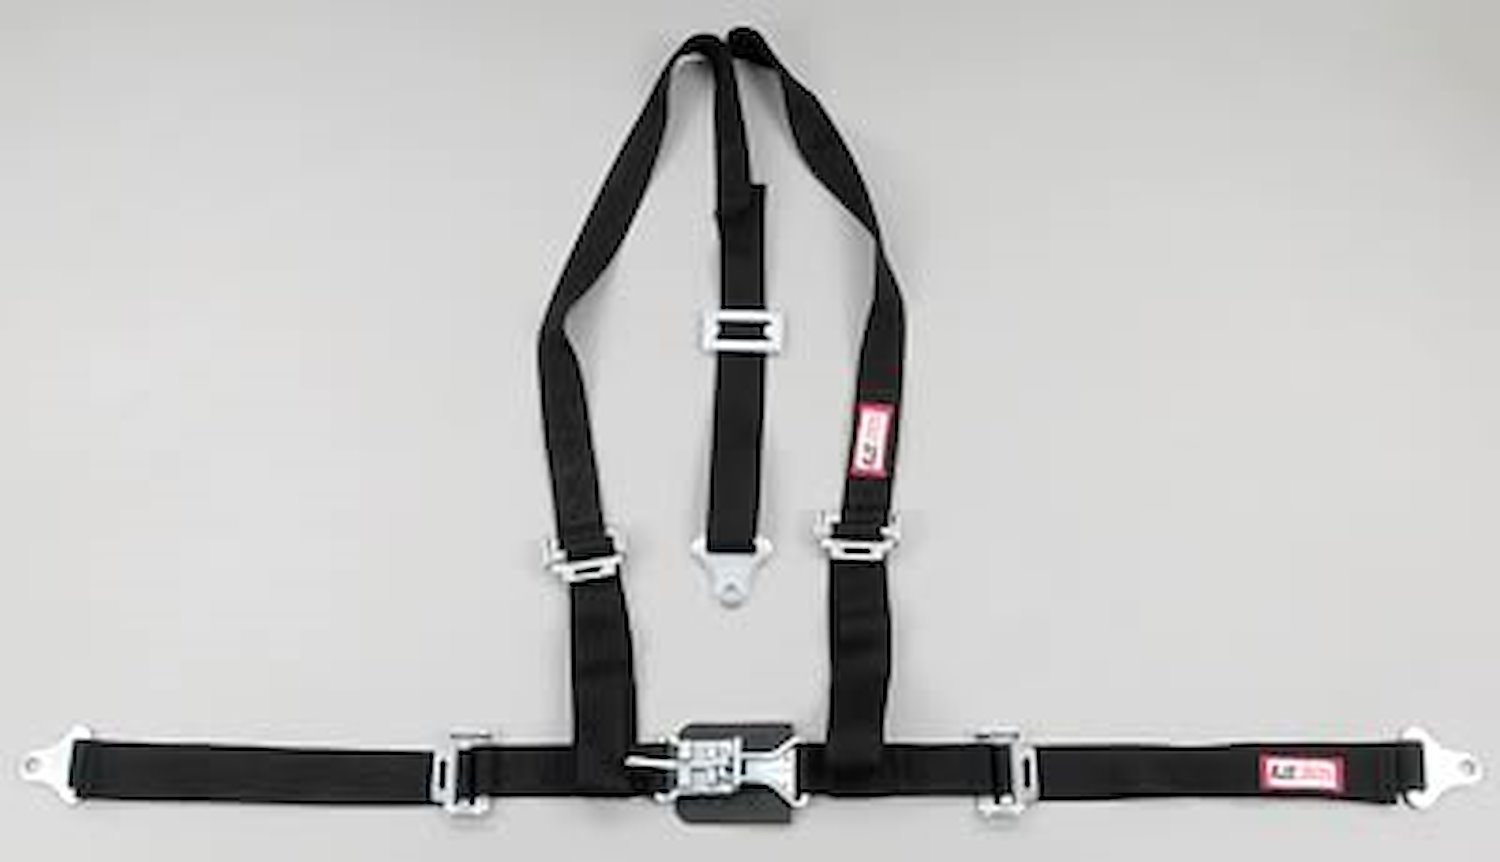 NON-SFI L&L HARNESS 2 PULL UP Lap Belt SNAP SEWN IN 2 S.H. V ROLL BAR Mount w/STERNUM STRAP BOLT GRAY